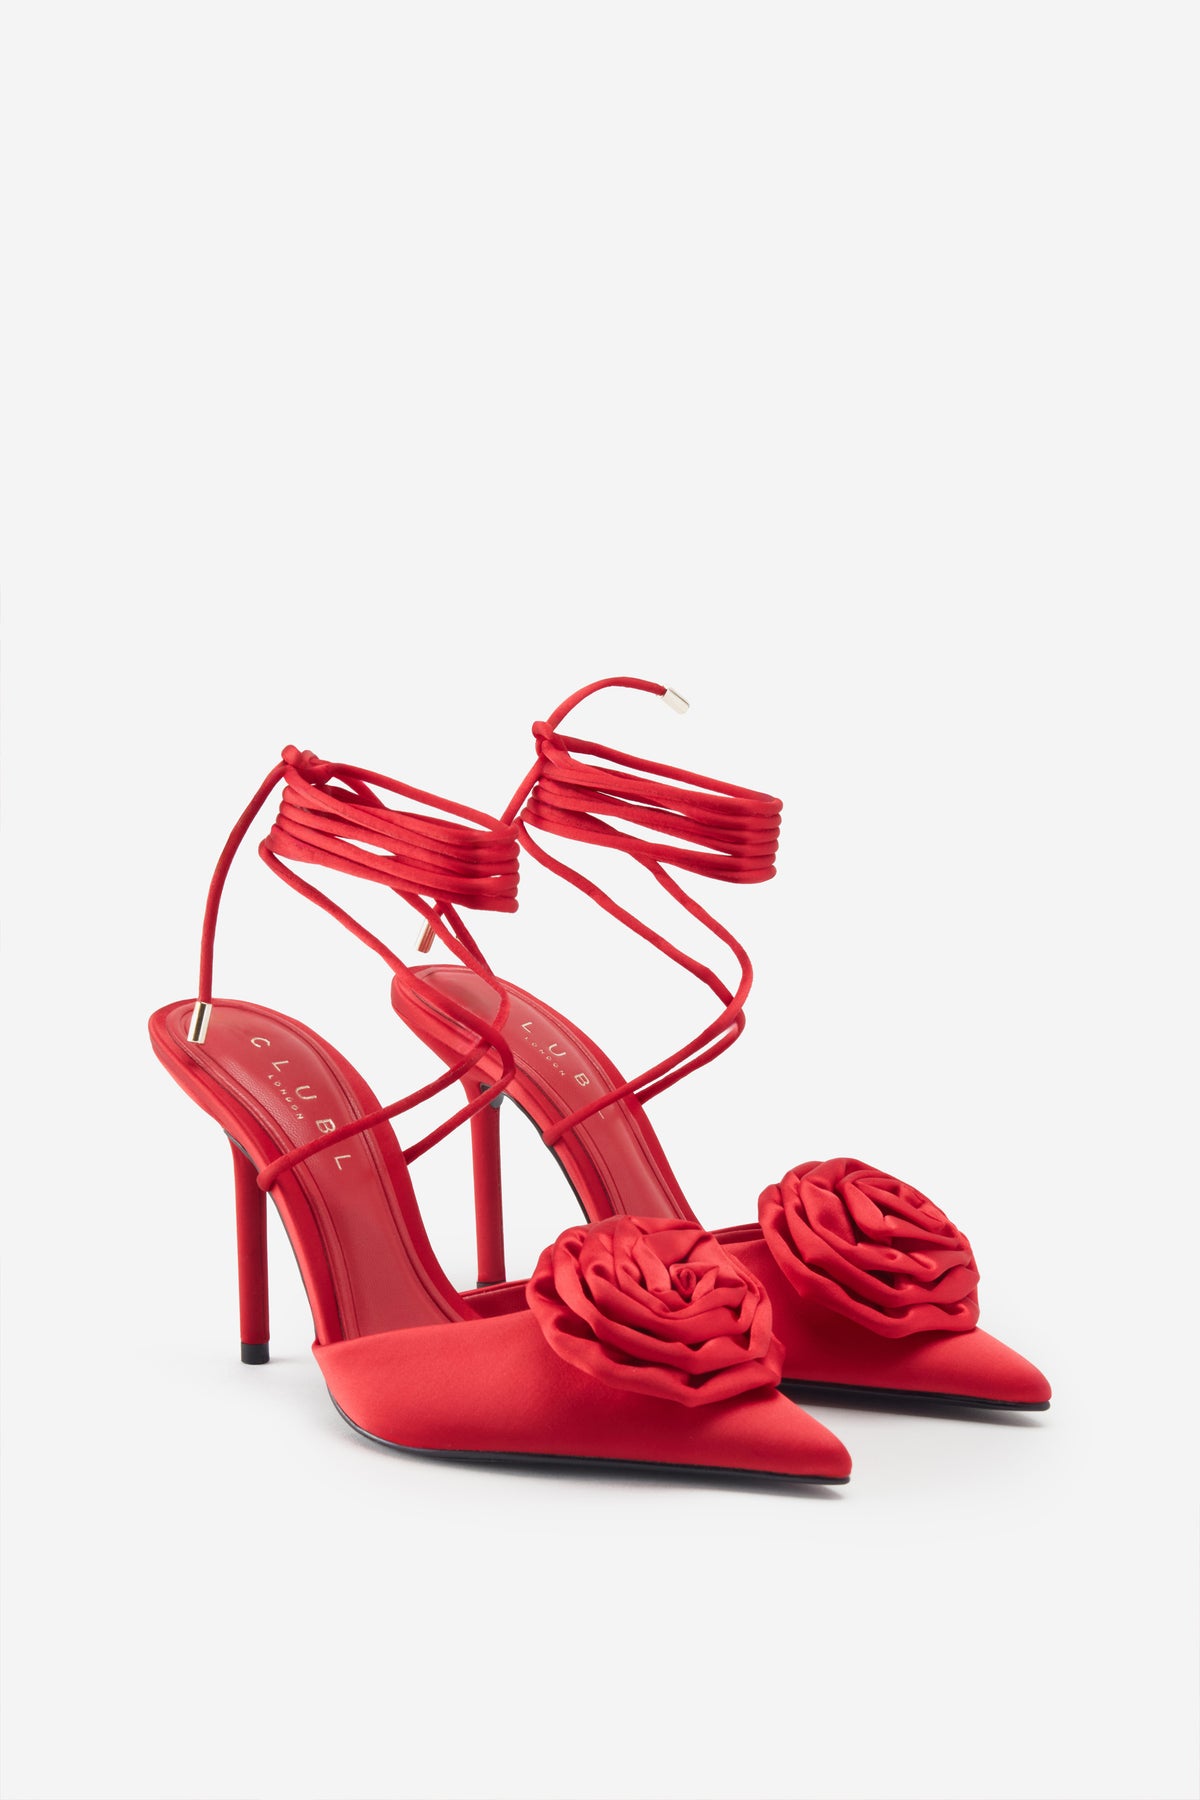 Red Lace-Up Heels - Red High Heel Sandals - Floral High Heels - Lulus